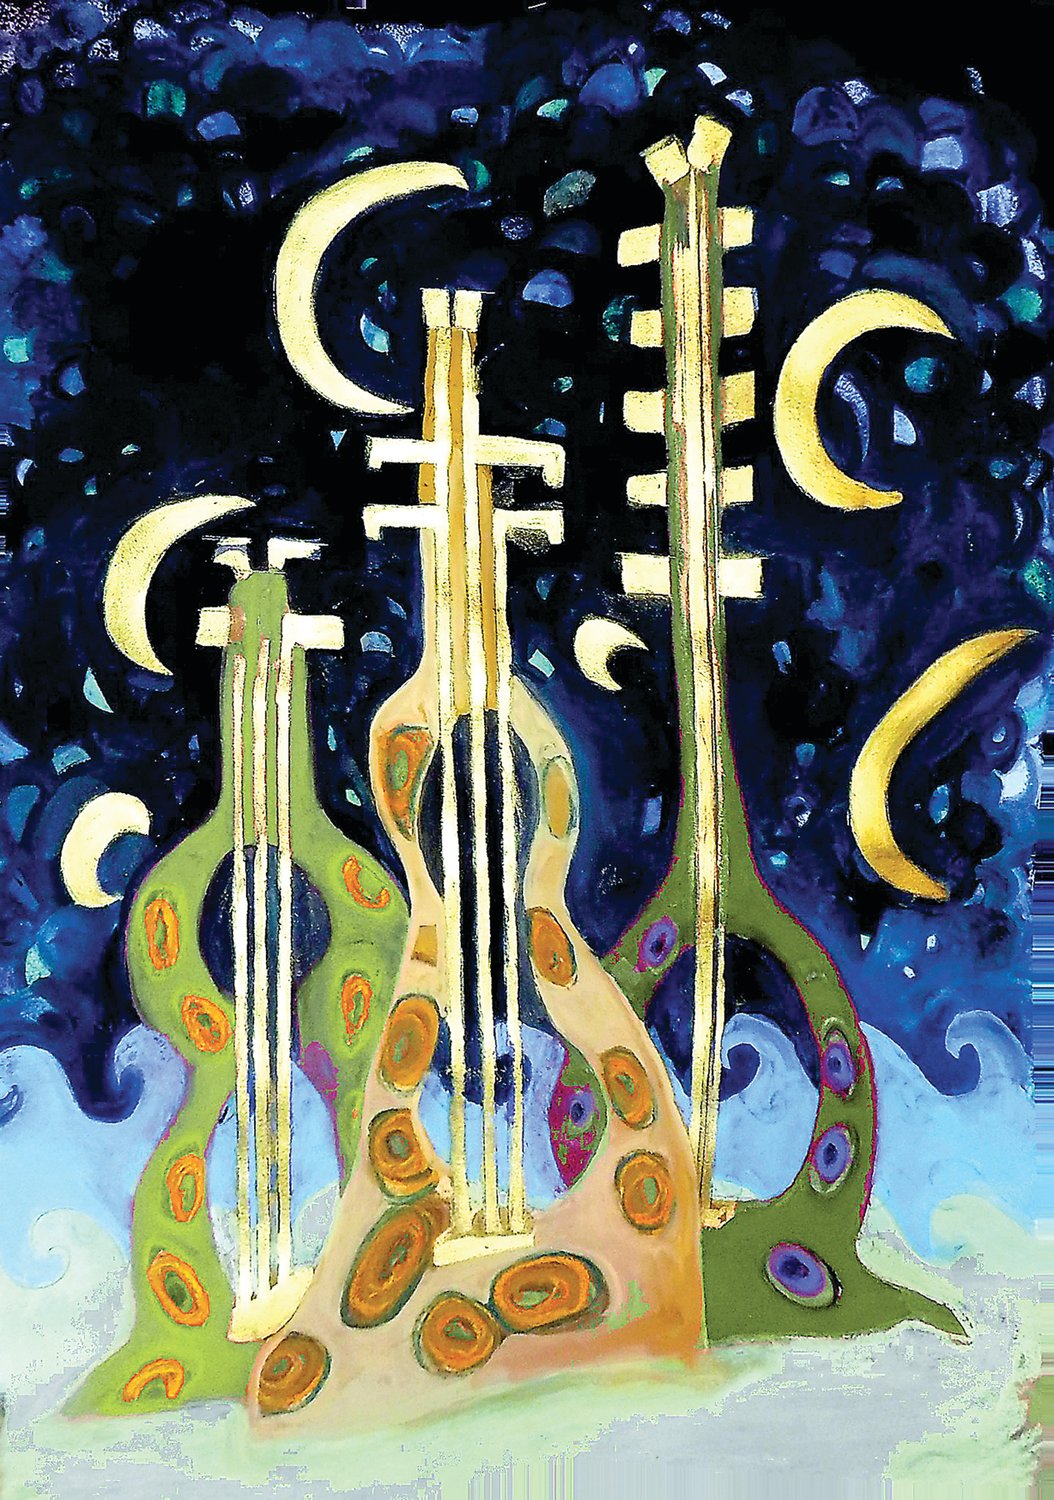 “Space Guitars” is by Polly Wood.